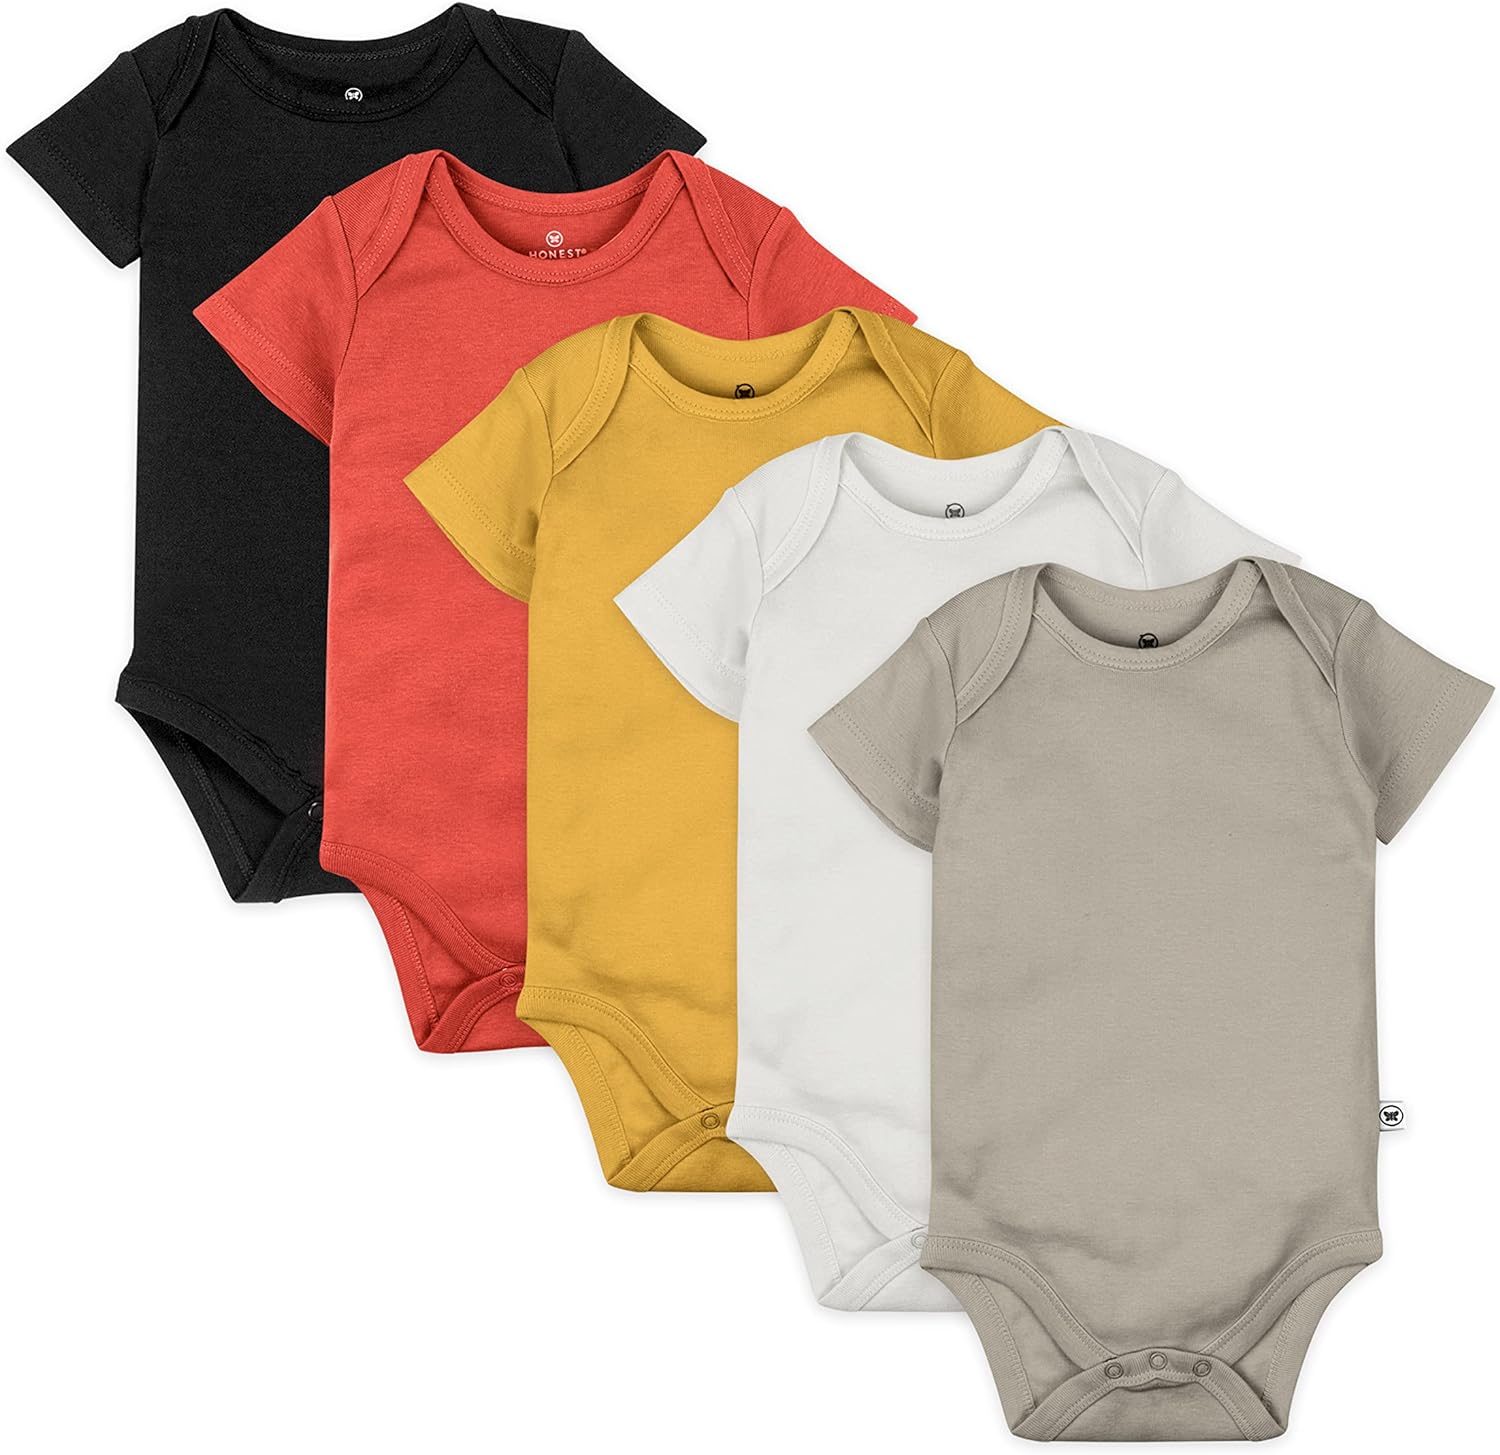 100% Cotton Pack of 2 England Short Sleeved Bodysuits Ages 0-3mos & 6-12mos 